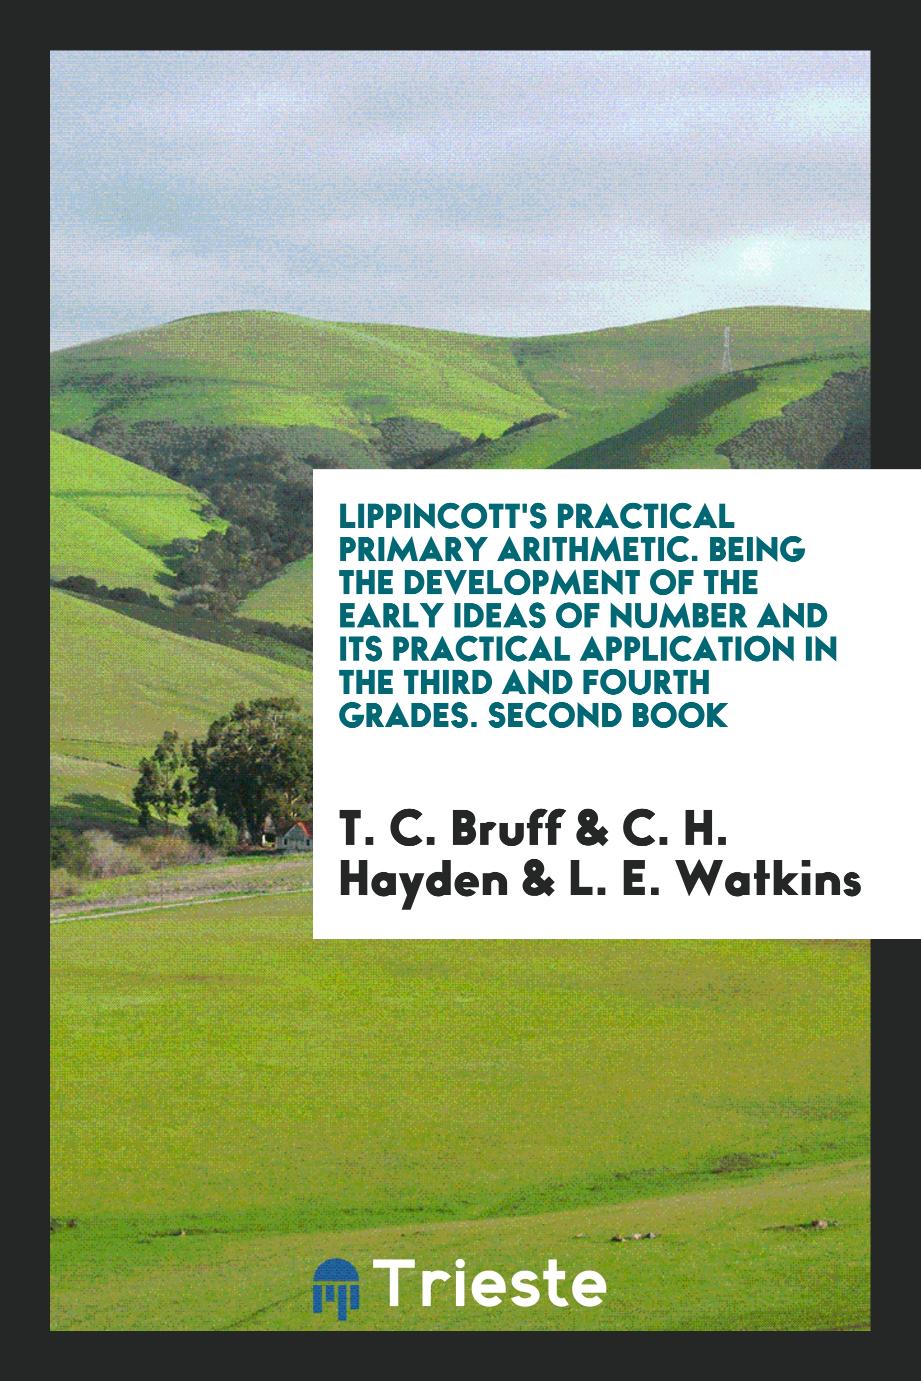 Lippincott's Practical Primary Arithmetic. Being the Development of the Early Ideas of Number and Its Practical Application in the Third and Fourth Grades. Second Book